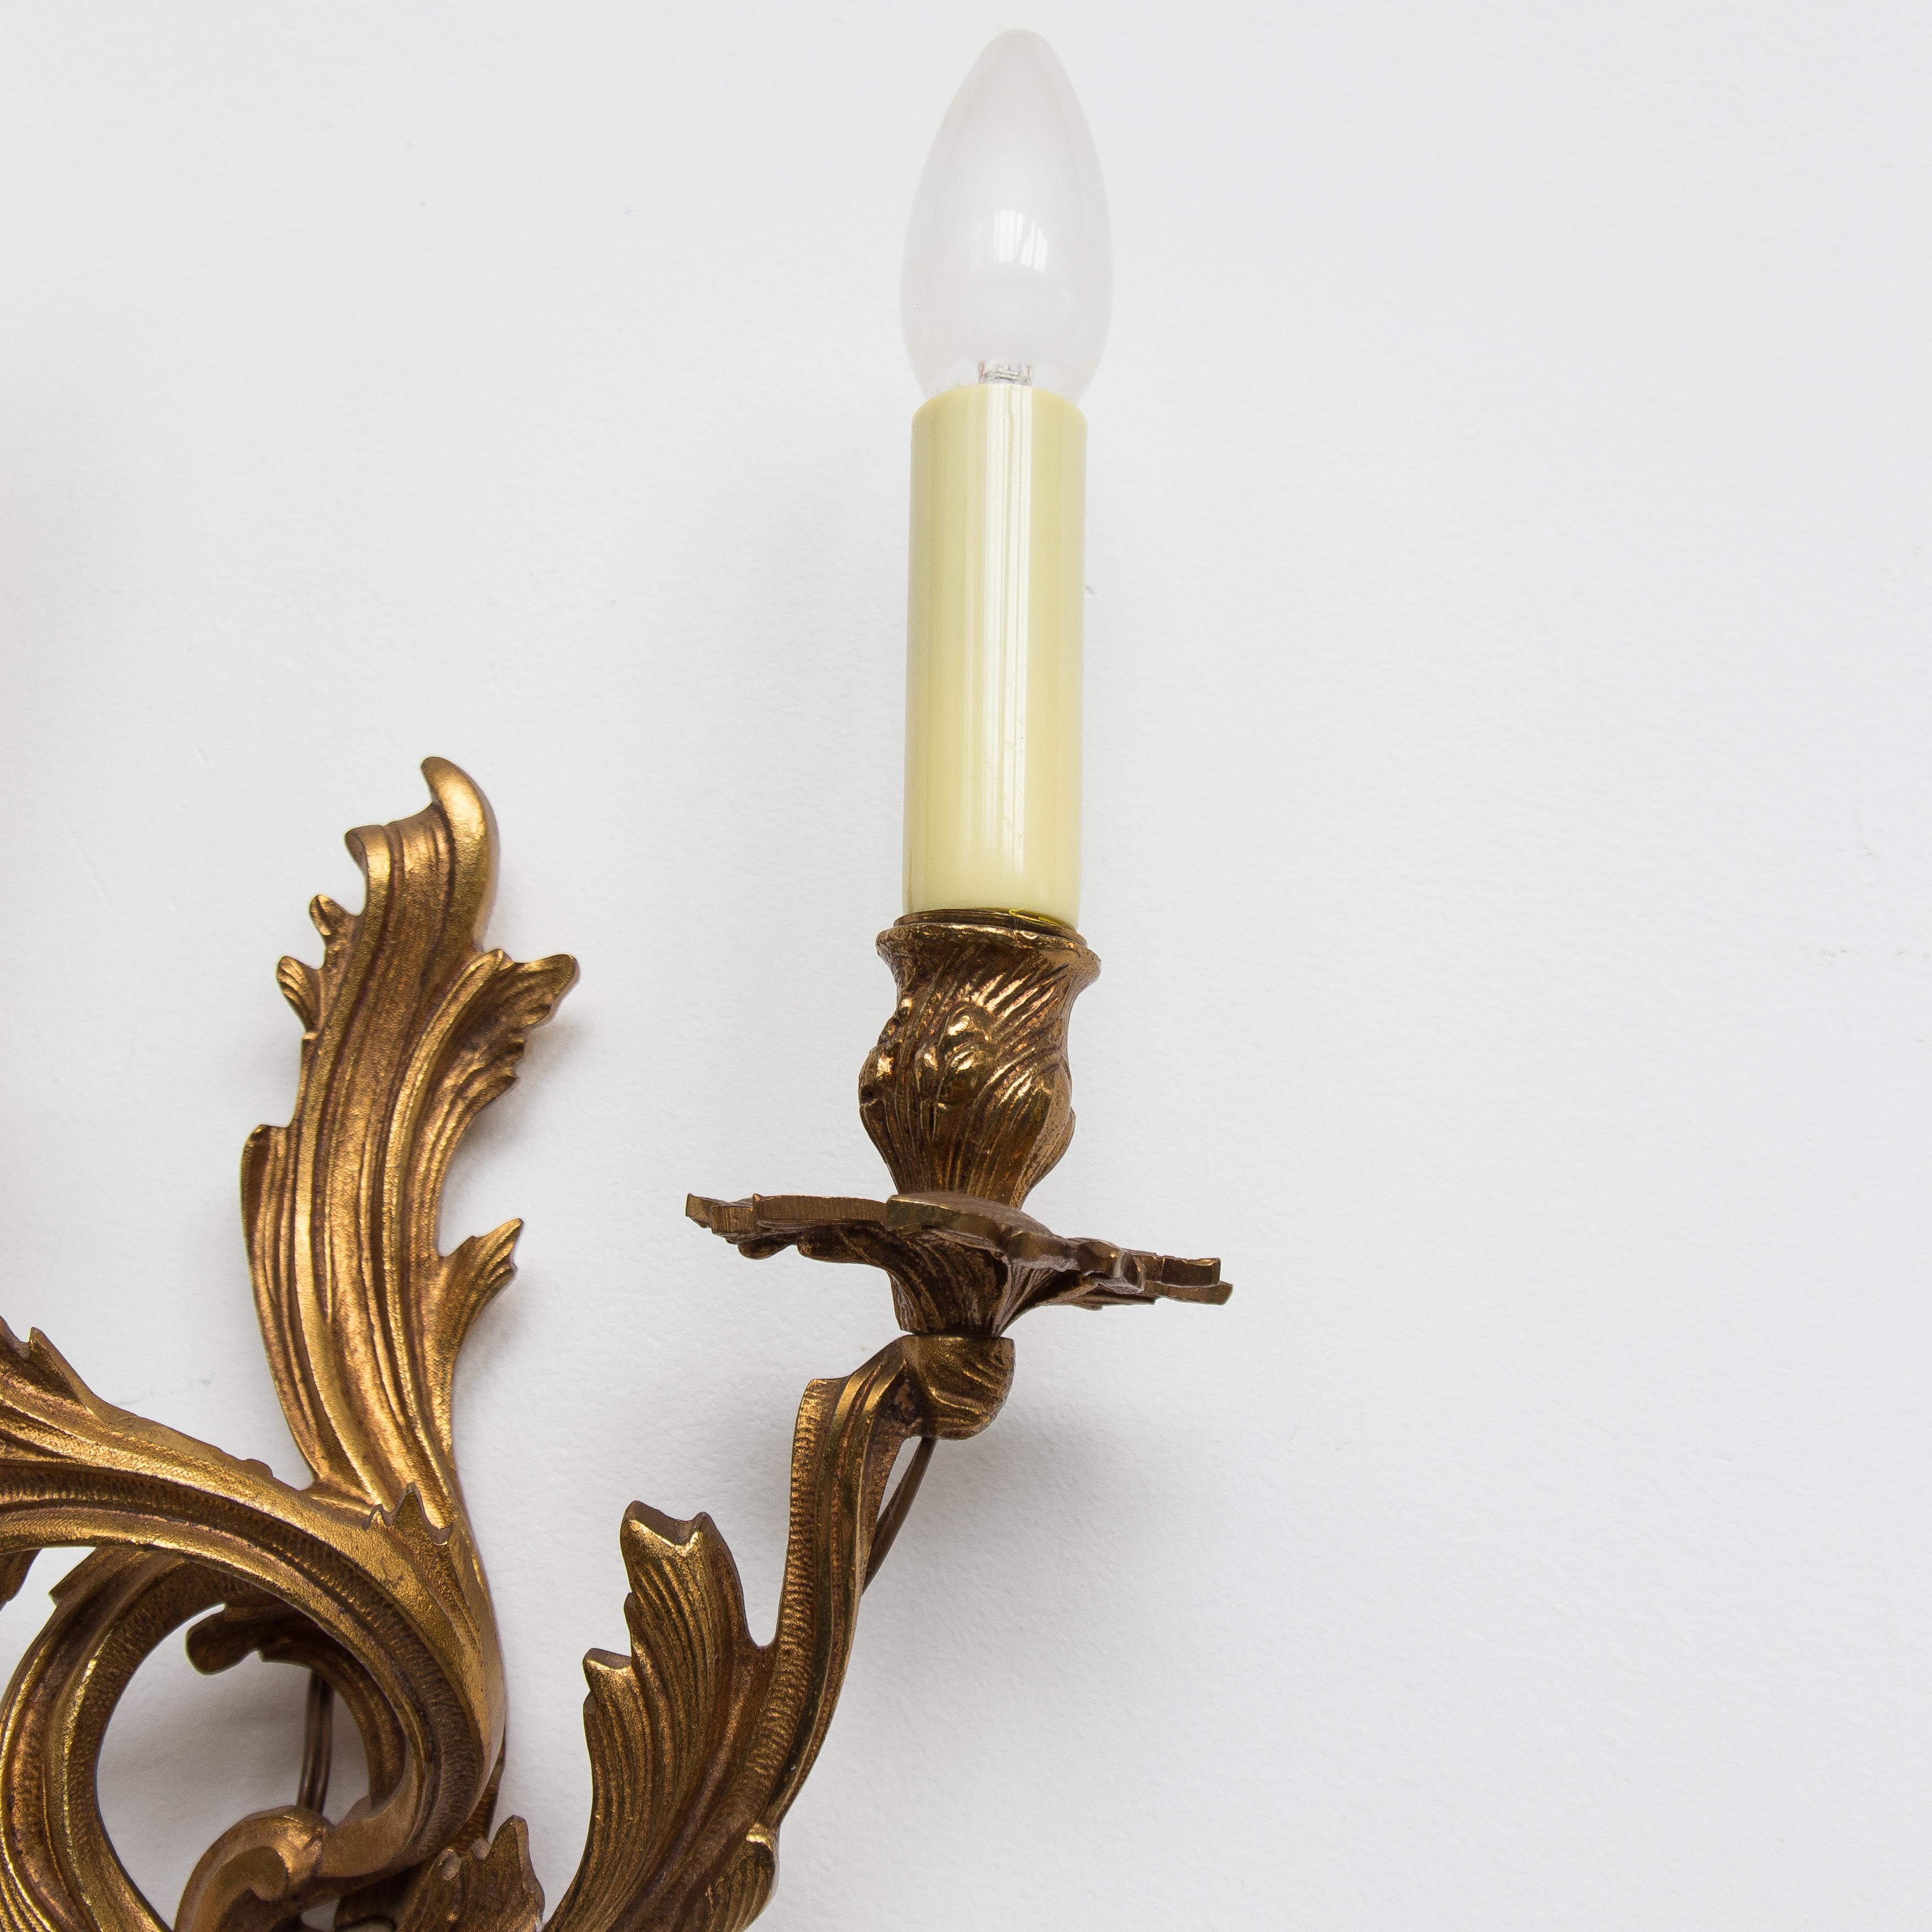 Chiseled and gilt bronze two-light antique wall sconce sculpted with flowing foliage and scrolls in Louis XV style. This Rococo decor is dominated by asymmetrical forms. Lamp fitting E14.